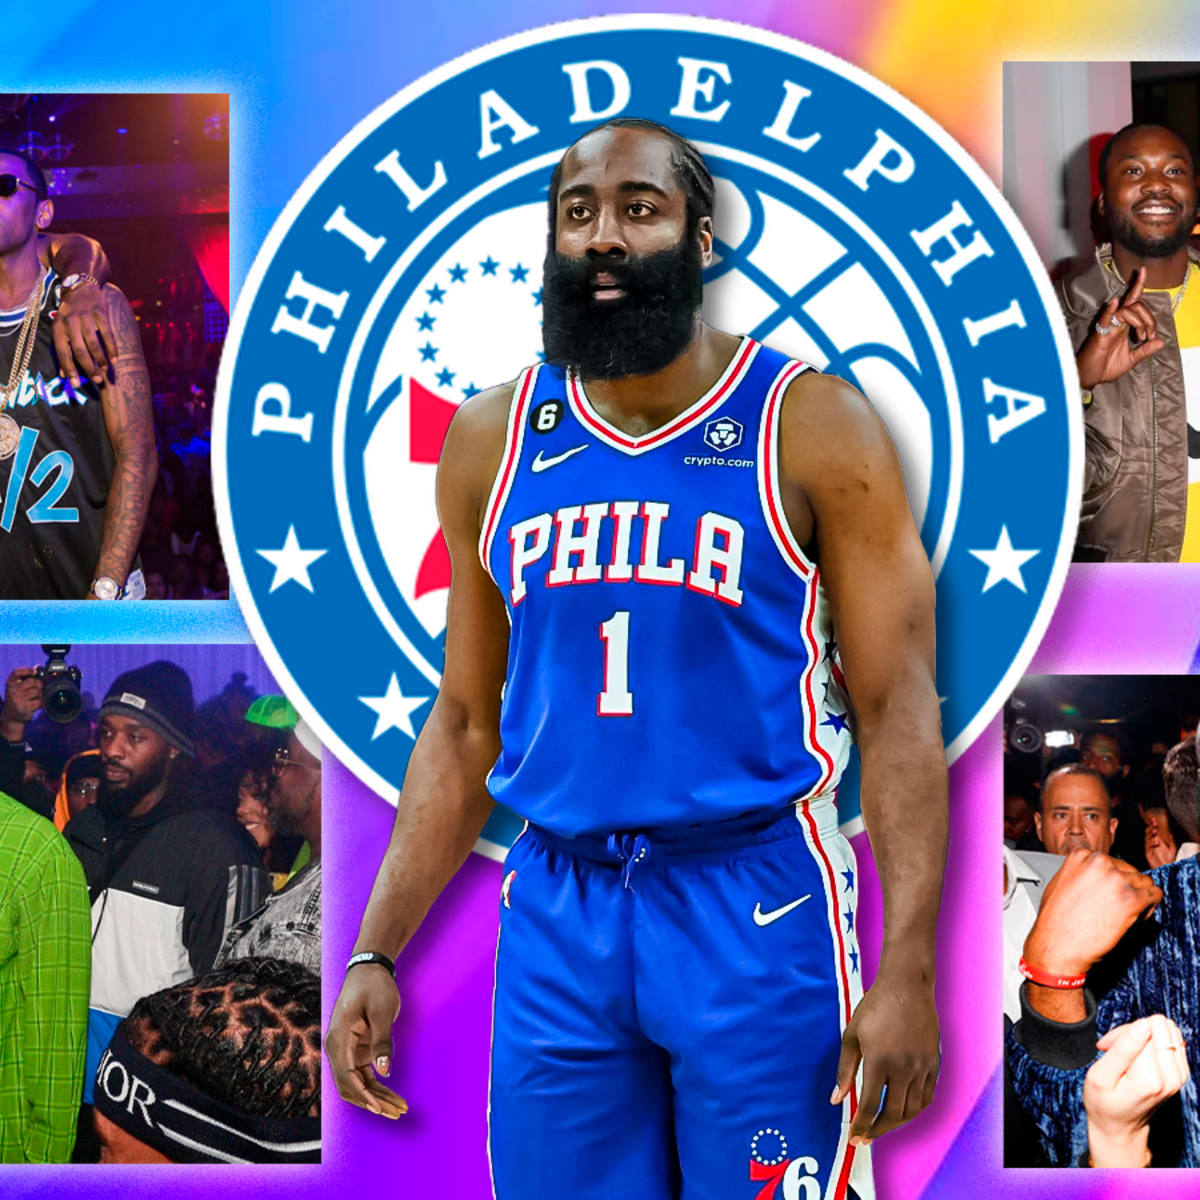 James Harden's Party Lifestyle: Has The Beard's Nightlife